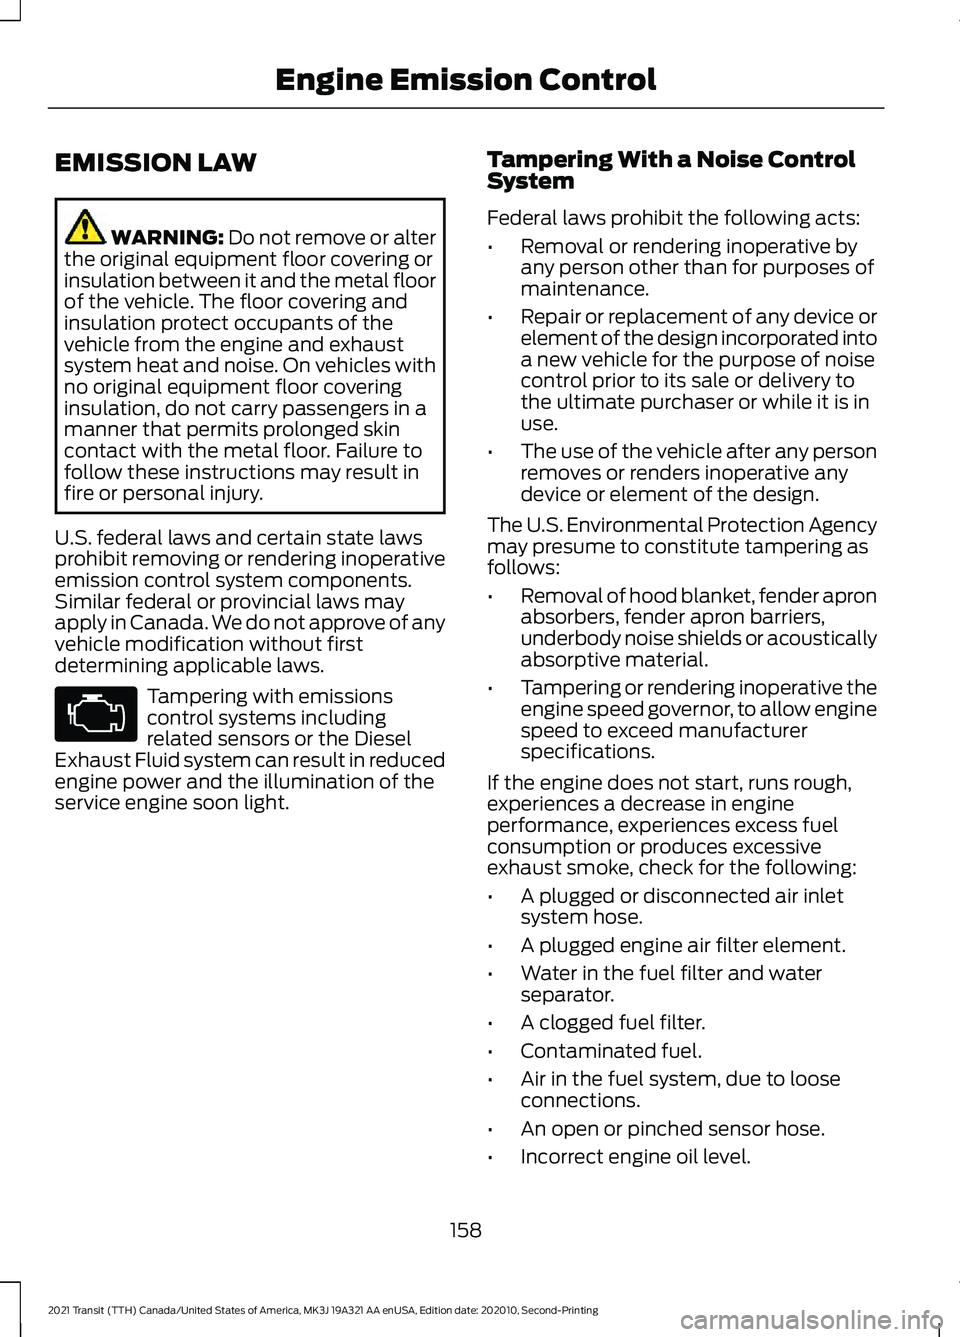 FORD TRANSIT 2021  Owners Manual EMISSION LAW
WARNING: Do not remove or alter
the original equipment floor covering or
insulation between it and the metal floor
of the vehicle. The floor covering and
insulation protect occupants of t